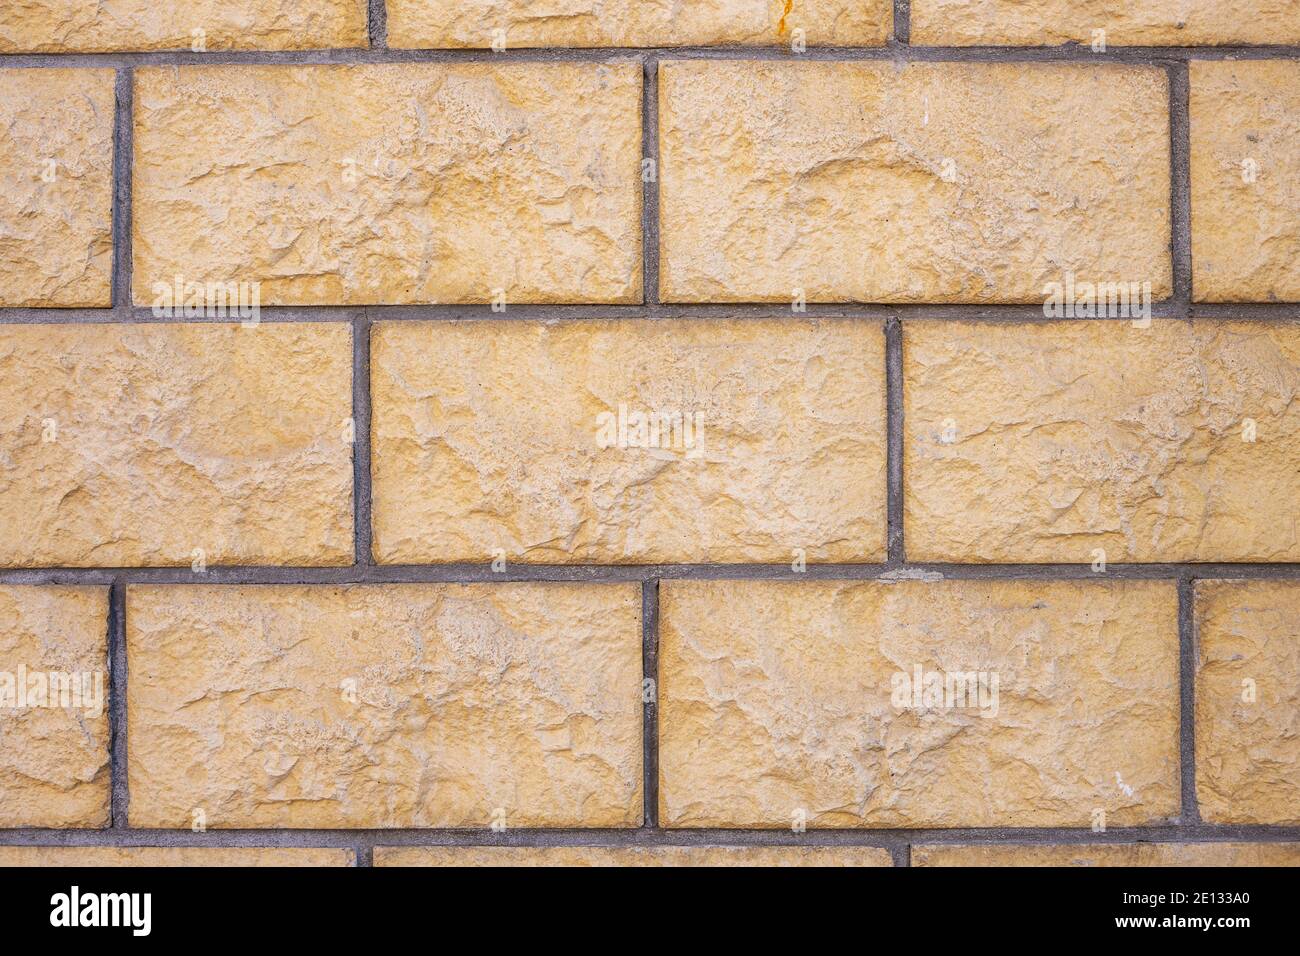 Background from a wall with beige block-shaped bricks Stock Photo